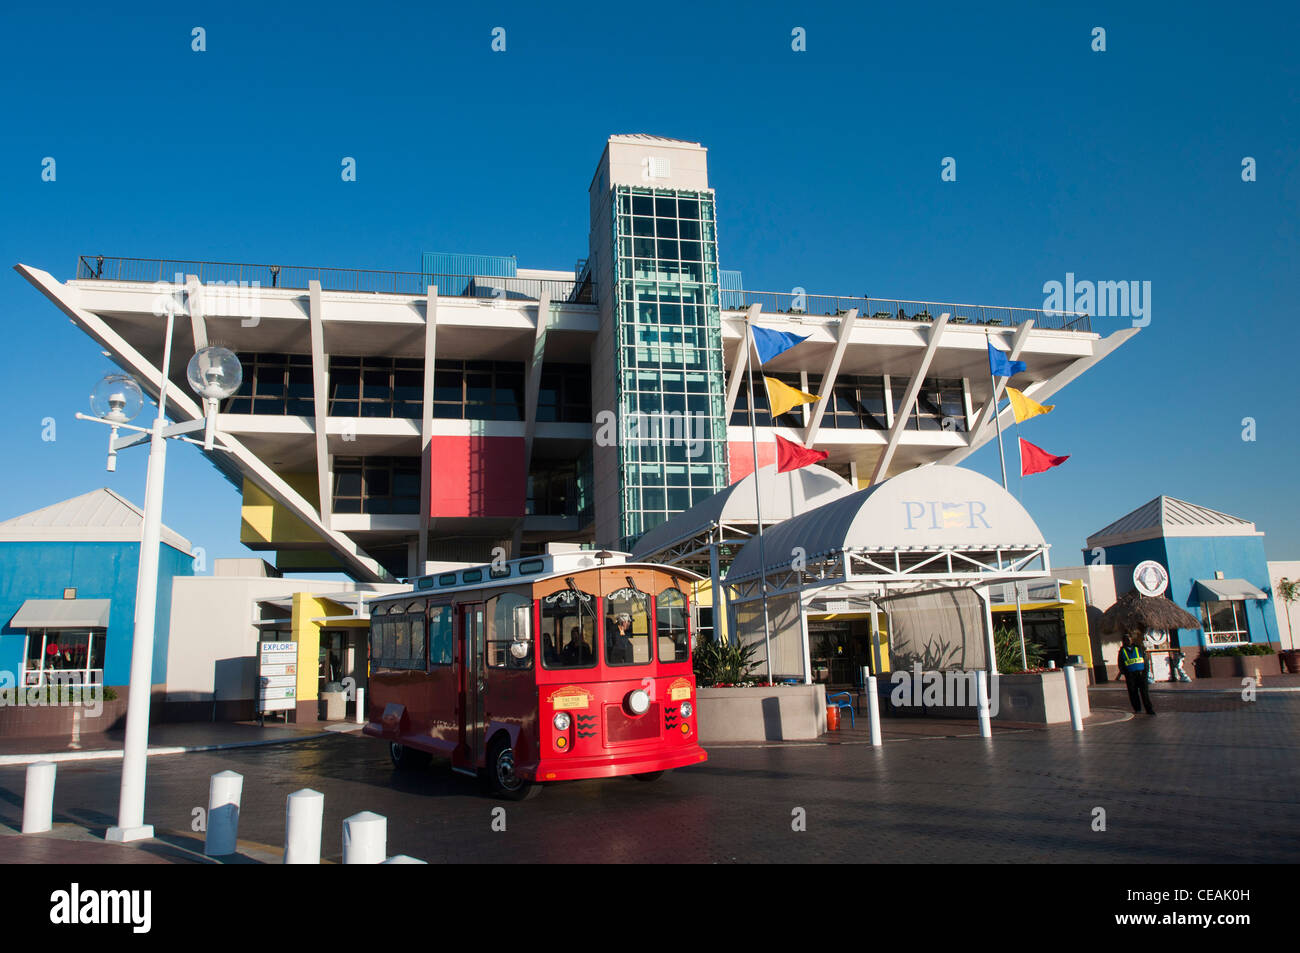 St Petersburg Pier One building, St Petersburg Florida, United States, USA, blue sky, colorful flags, red bus Stock Photo